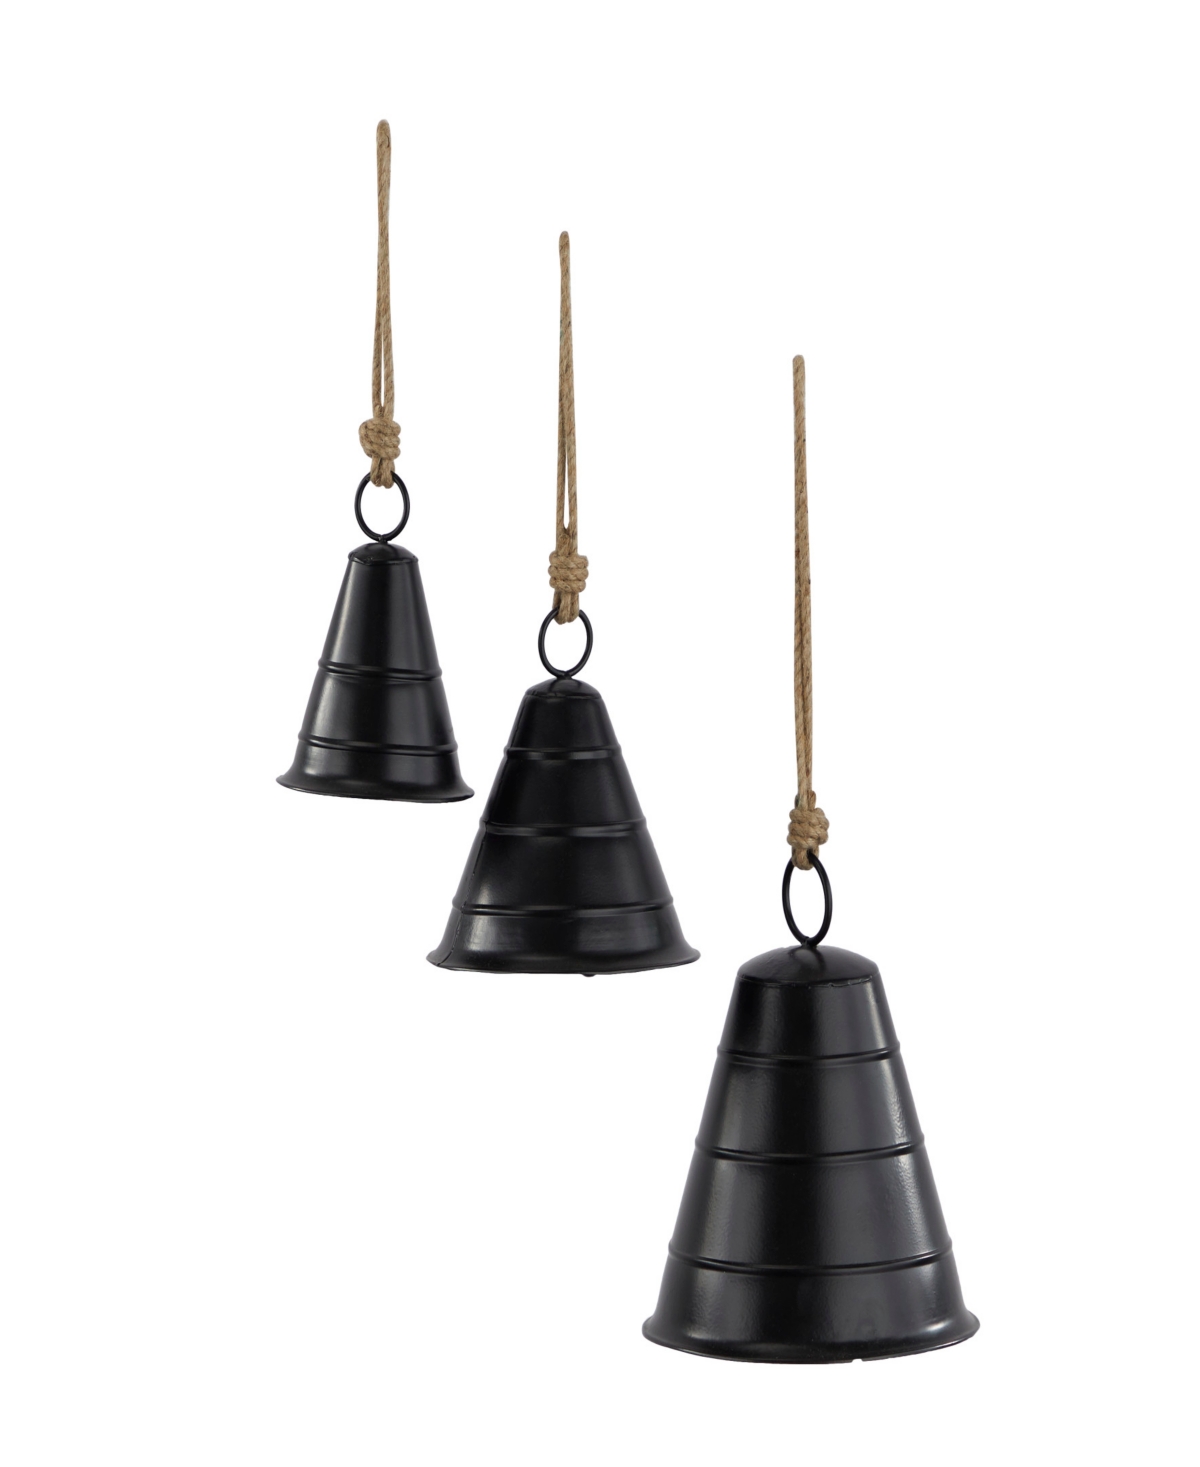 Rosemary Lane Black Metal Bohemian Decorative Cow Bell With Jute Hanging Rope Set 3 Pieces